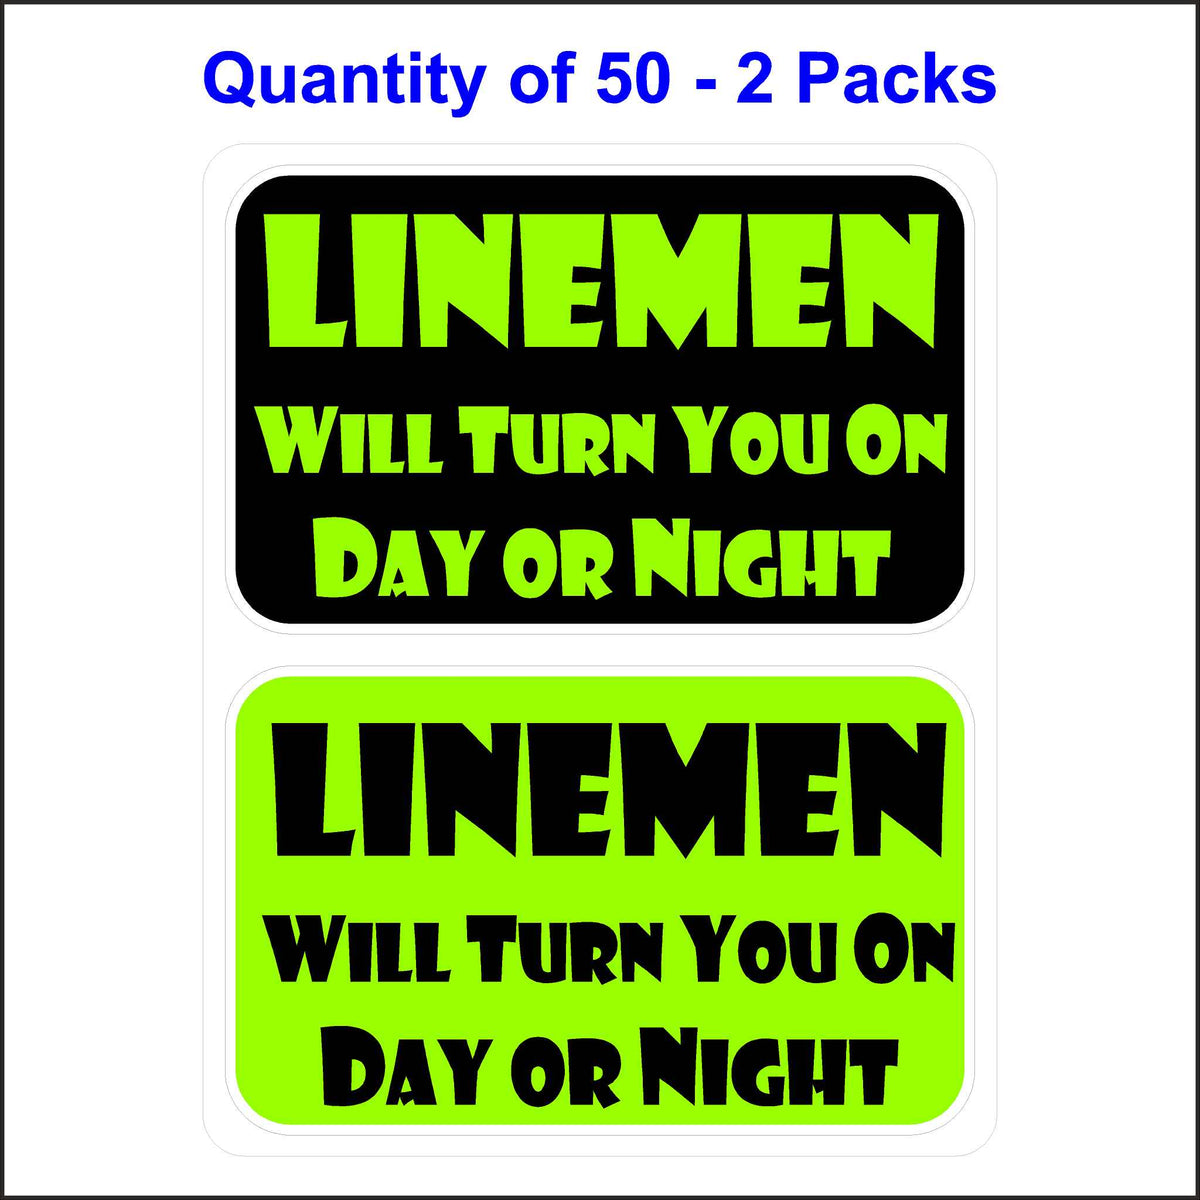 Lineman Will Turn You on Day or Night Stickers. 50 Quantity.